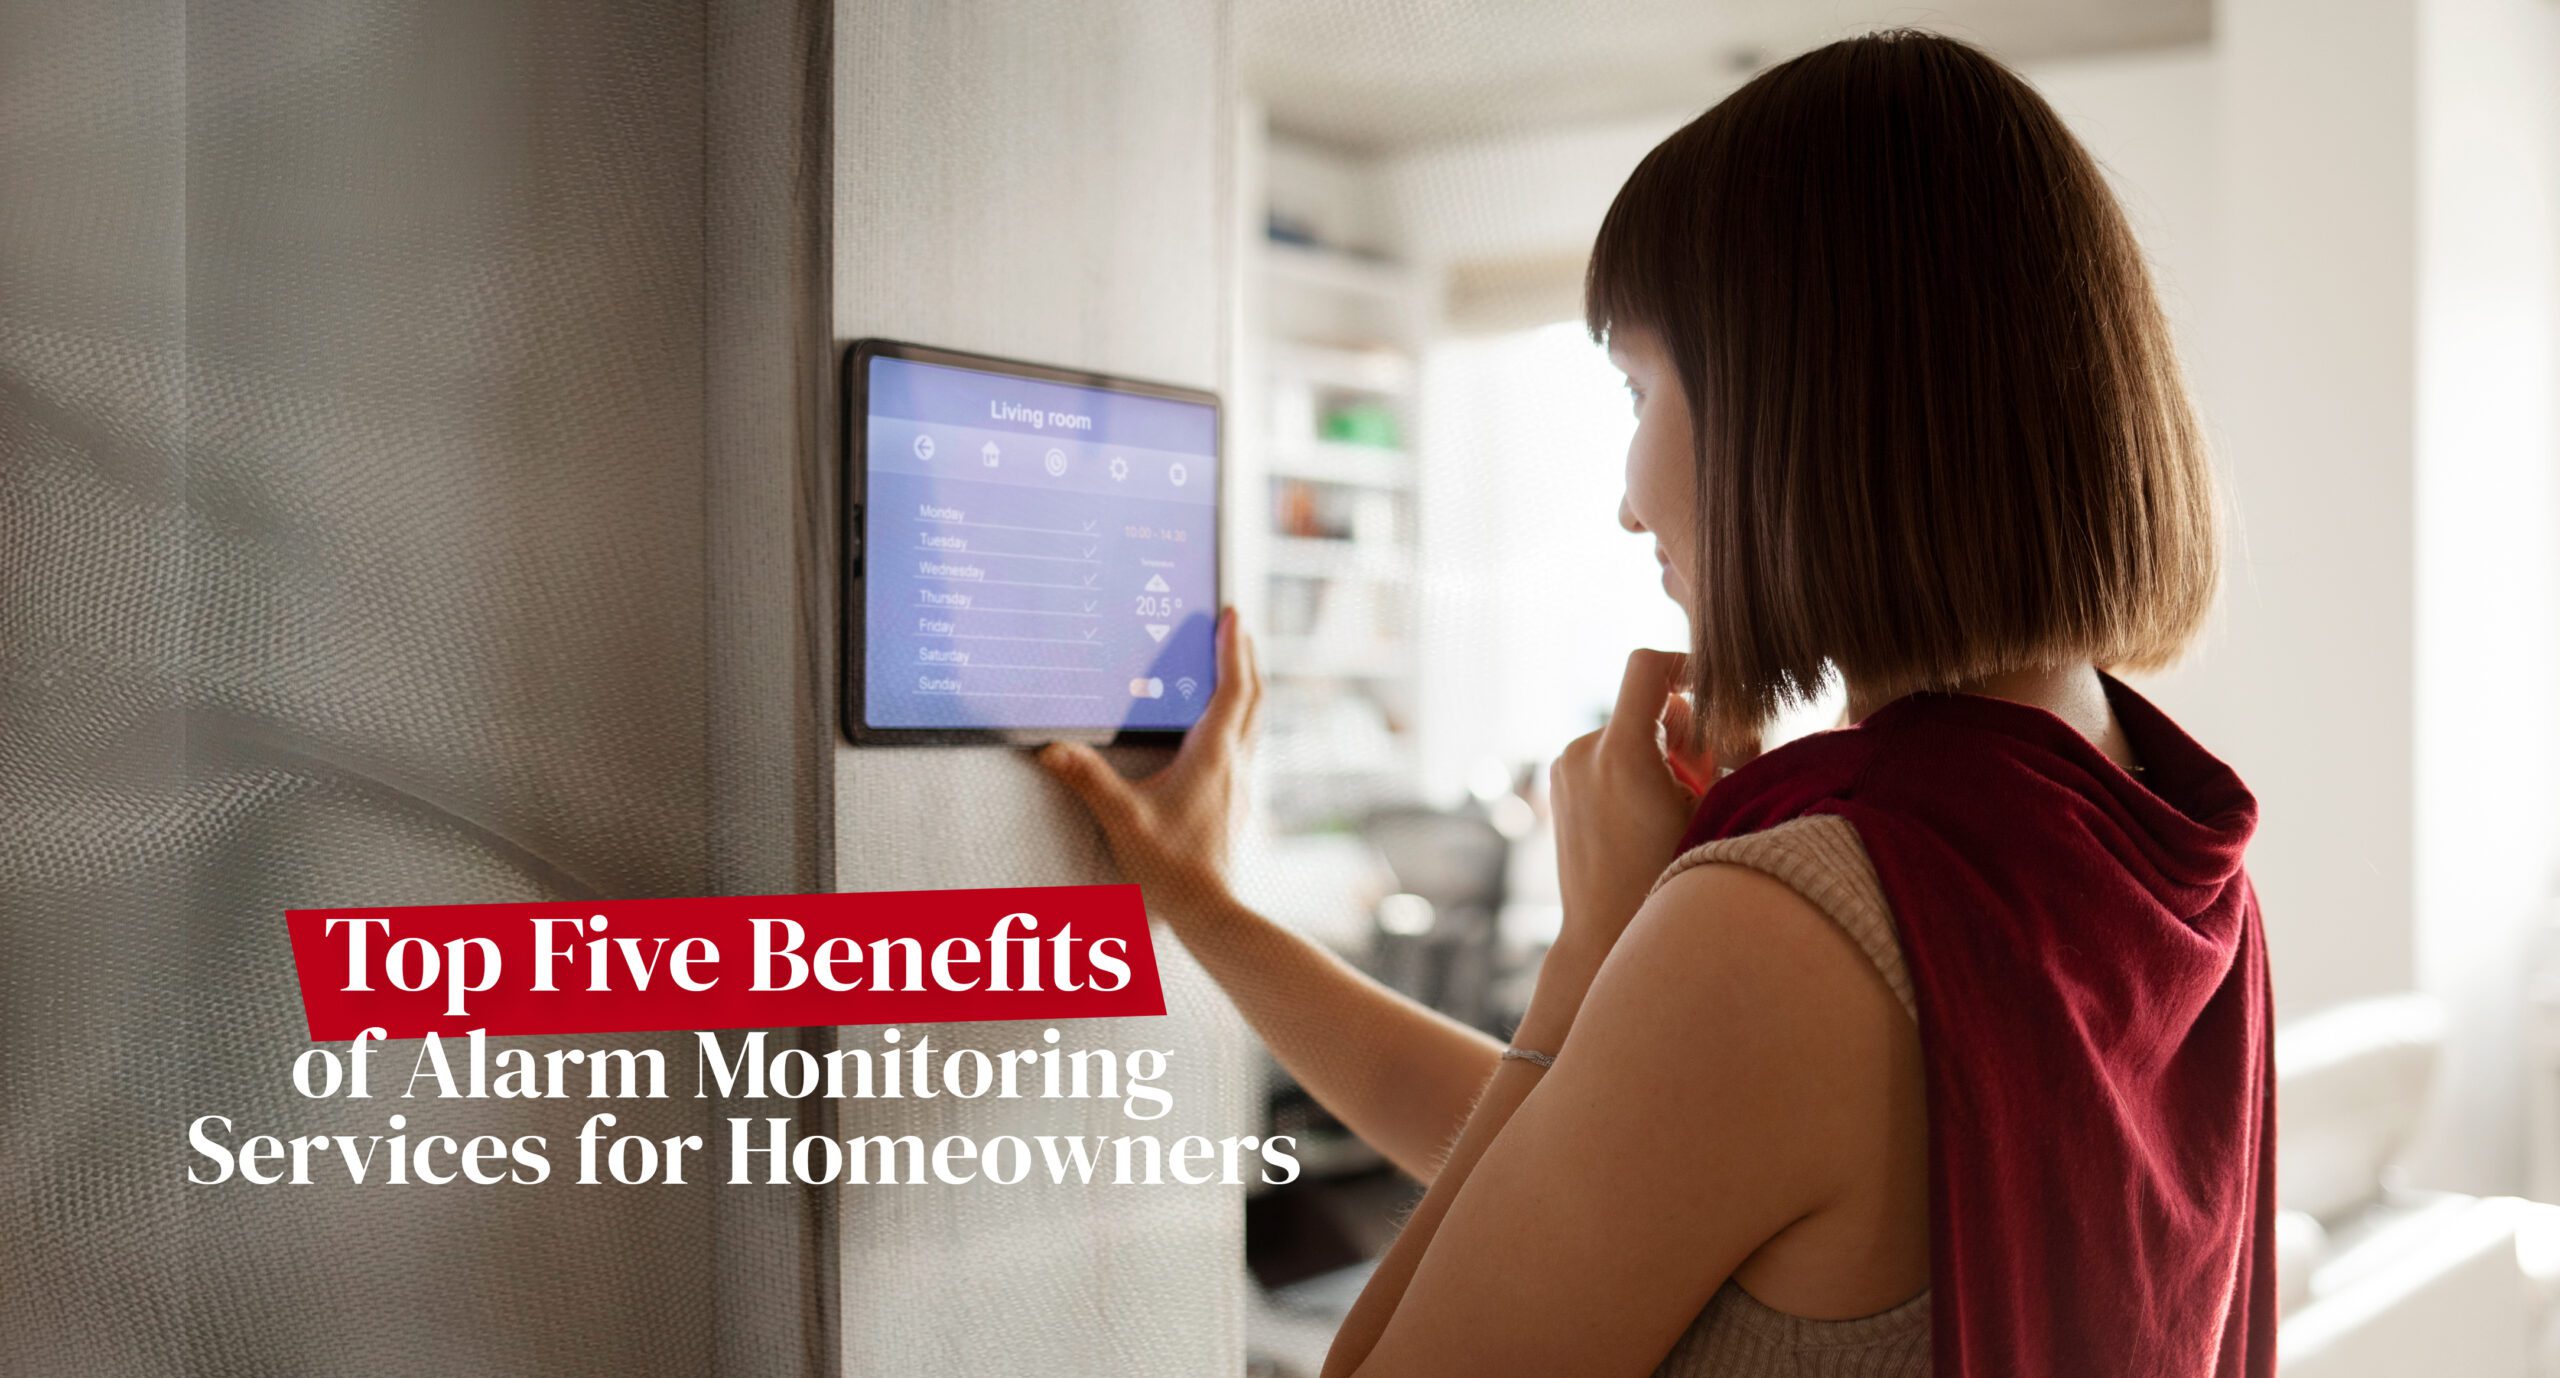 Featured image for “Top Five Benefits of Alarm Monitoring Services for Homeowners”